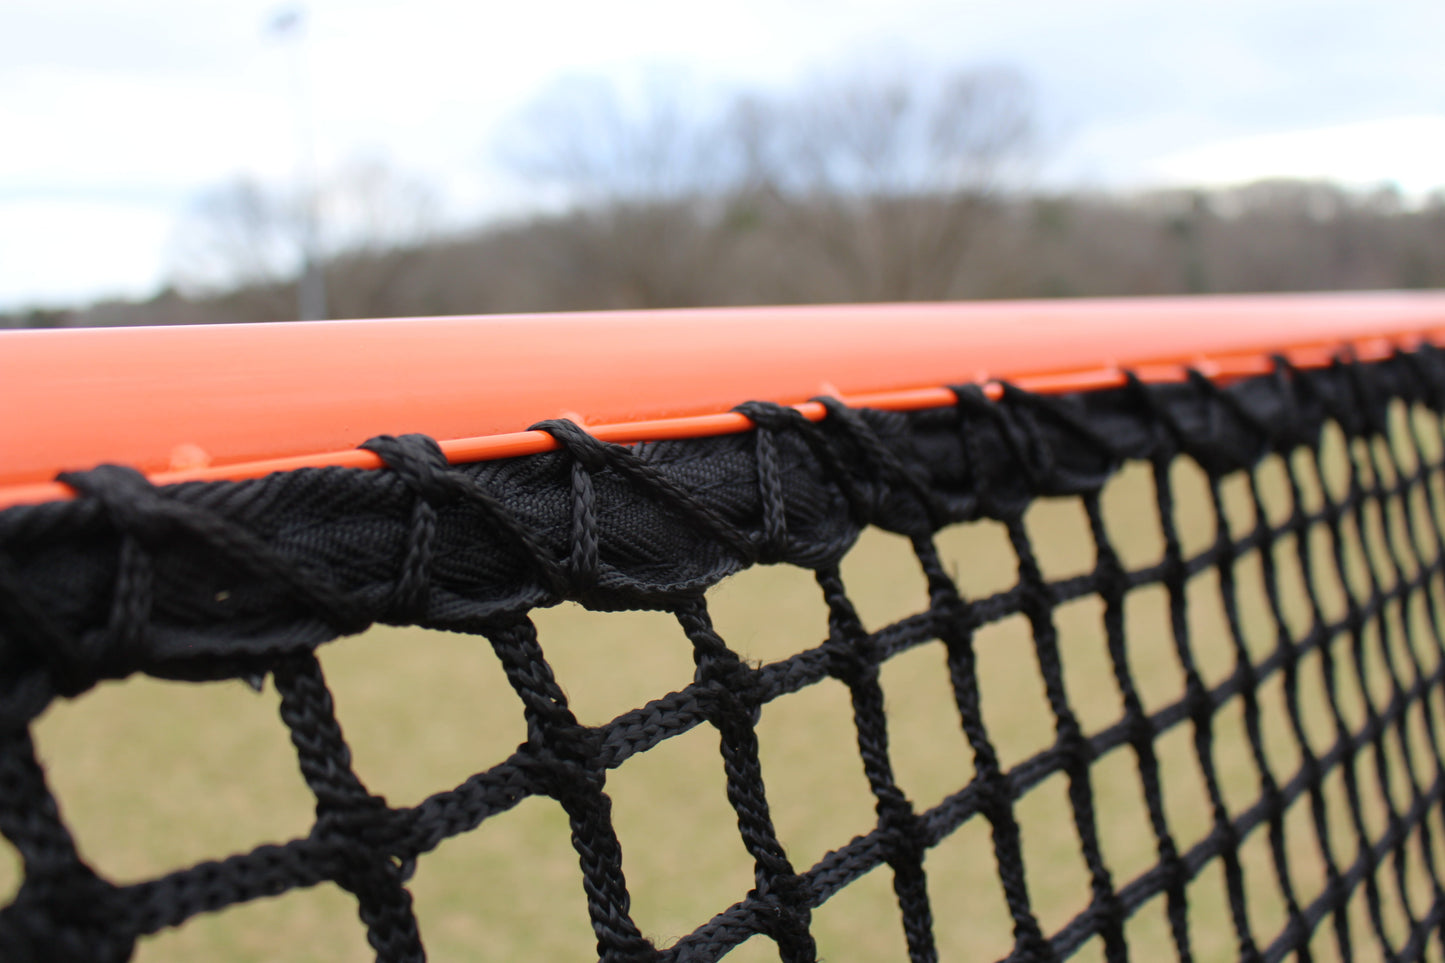 7mm College - High School "Beast Mode" PROFESSIONAL Lacrosse 6x6x7 Replacement Net, Includes 120' Lacing Cord & Bungees by Crankshooter® - FREE SHIPPING